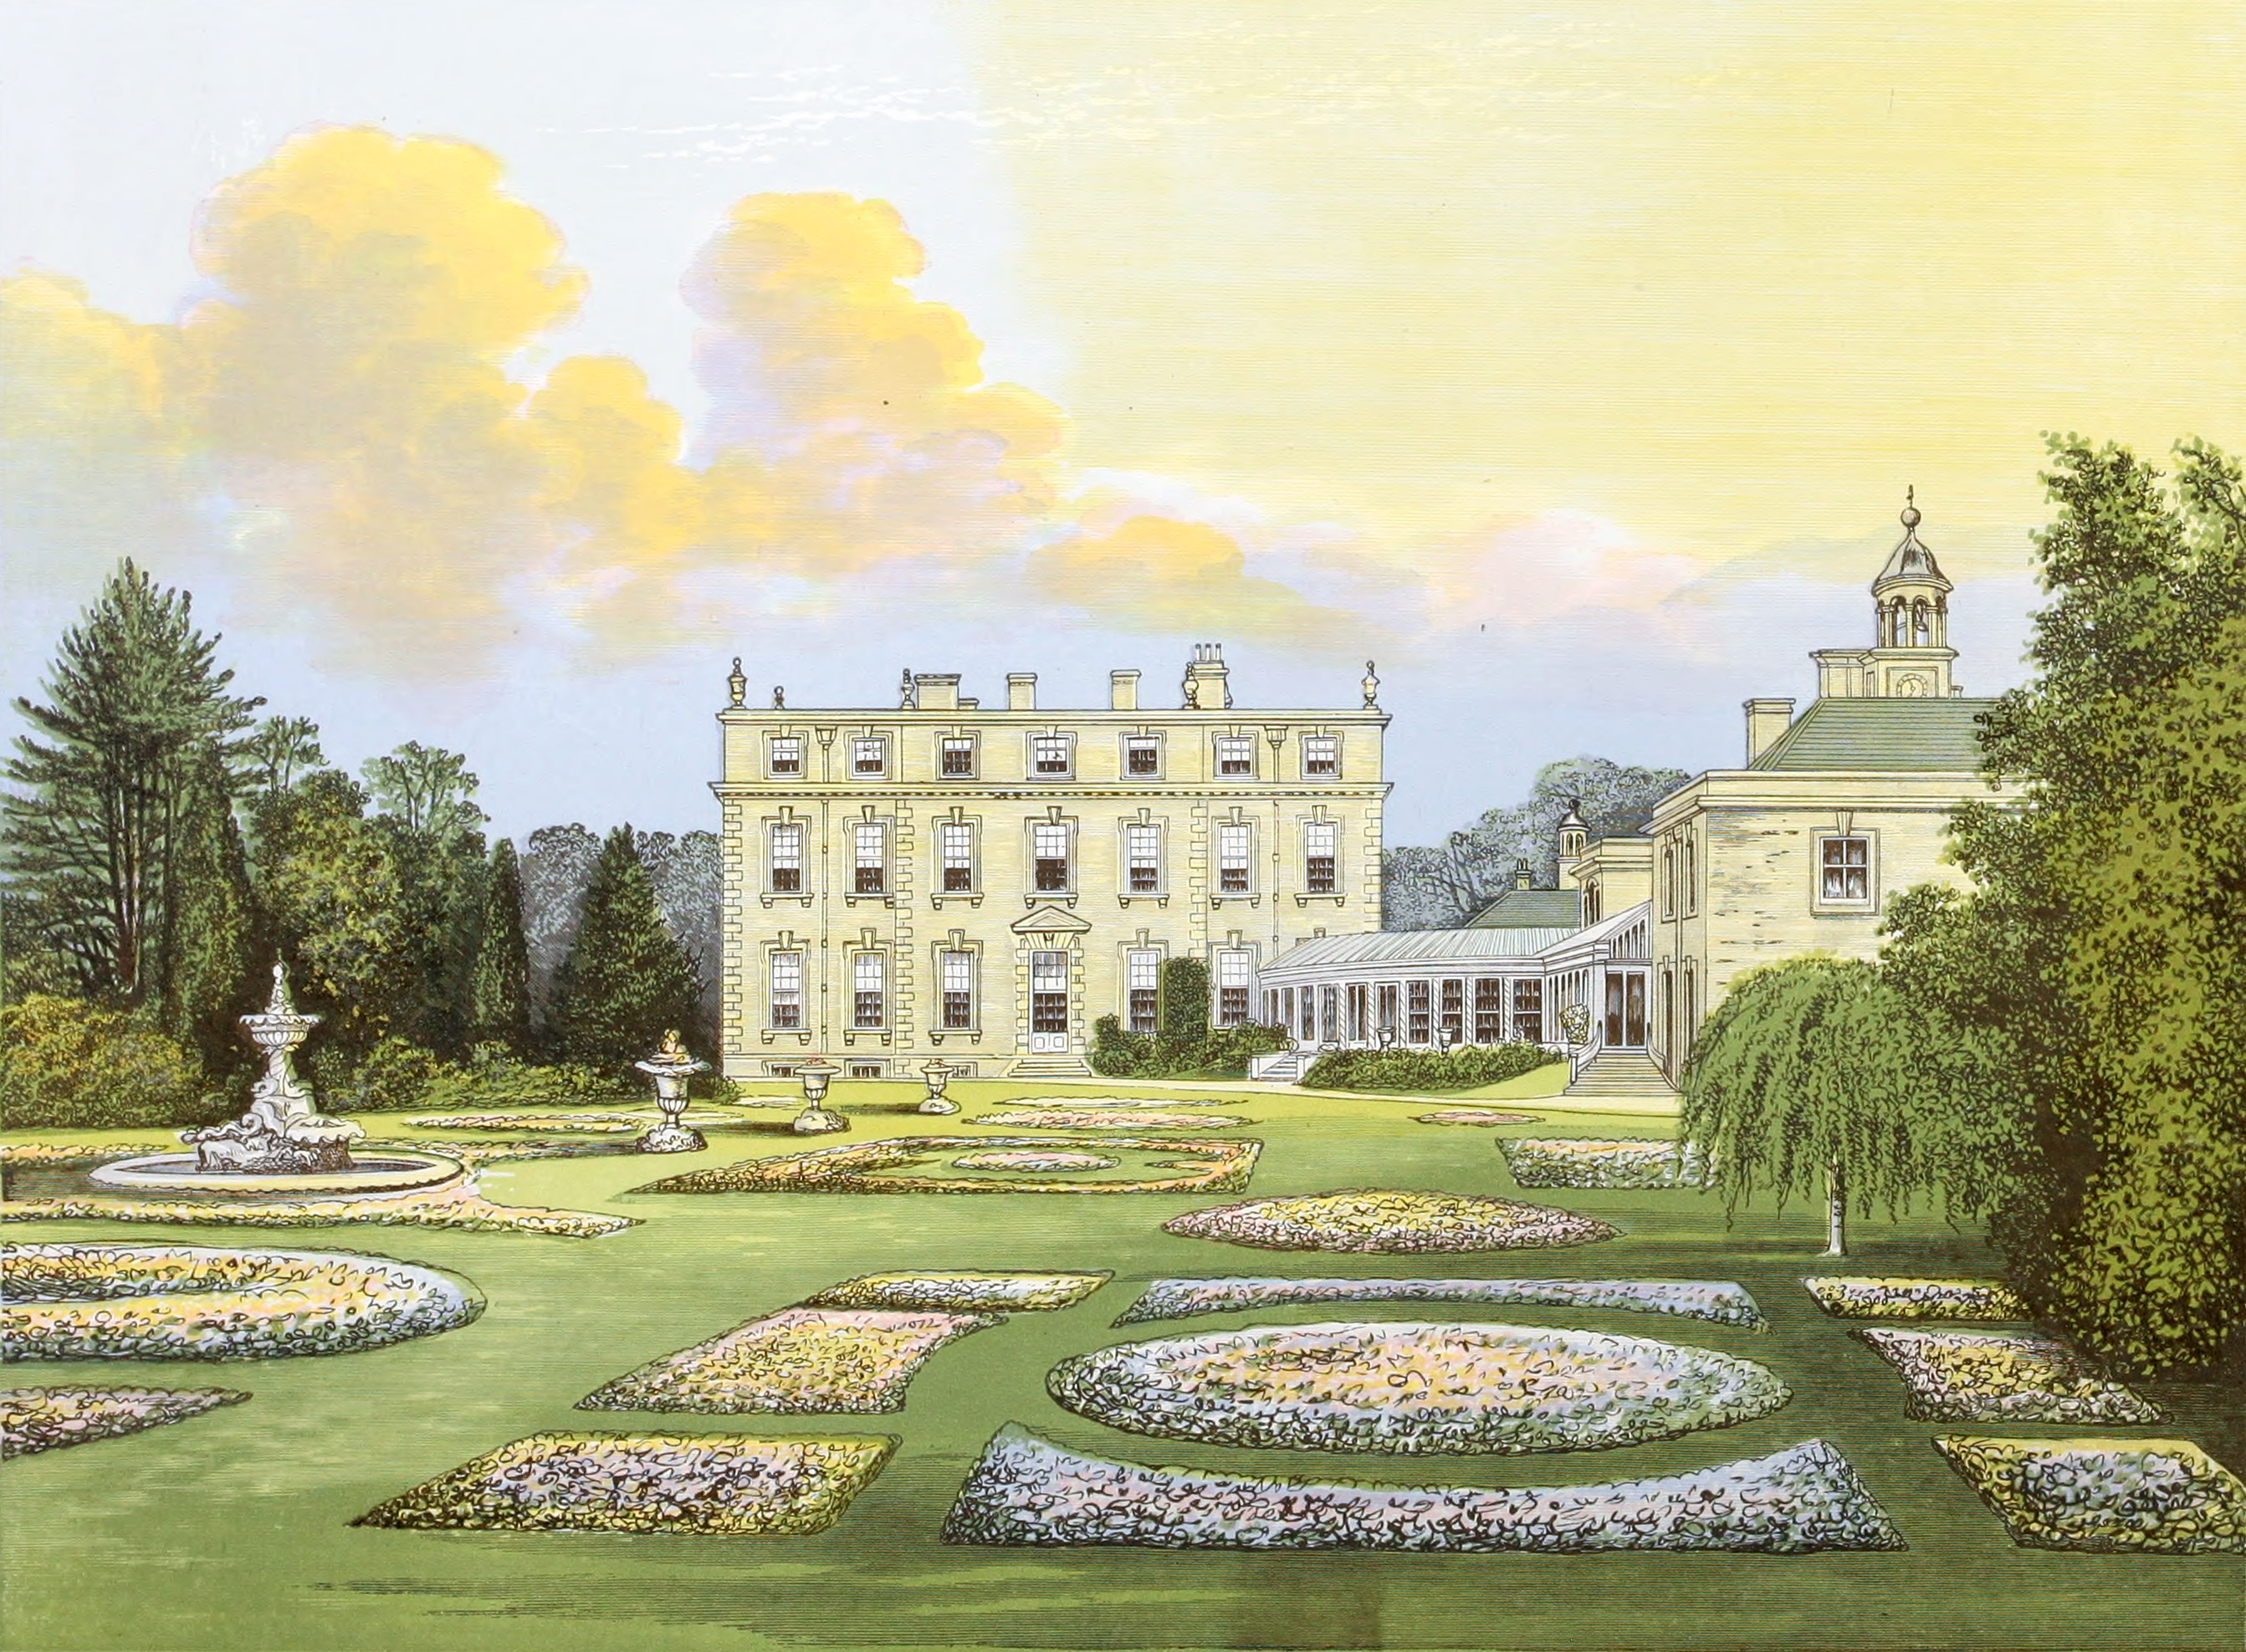 Ditchley House